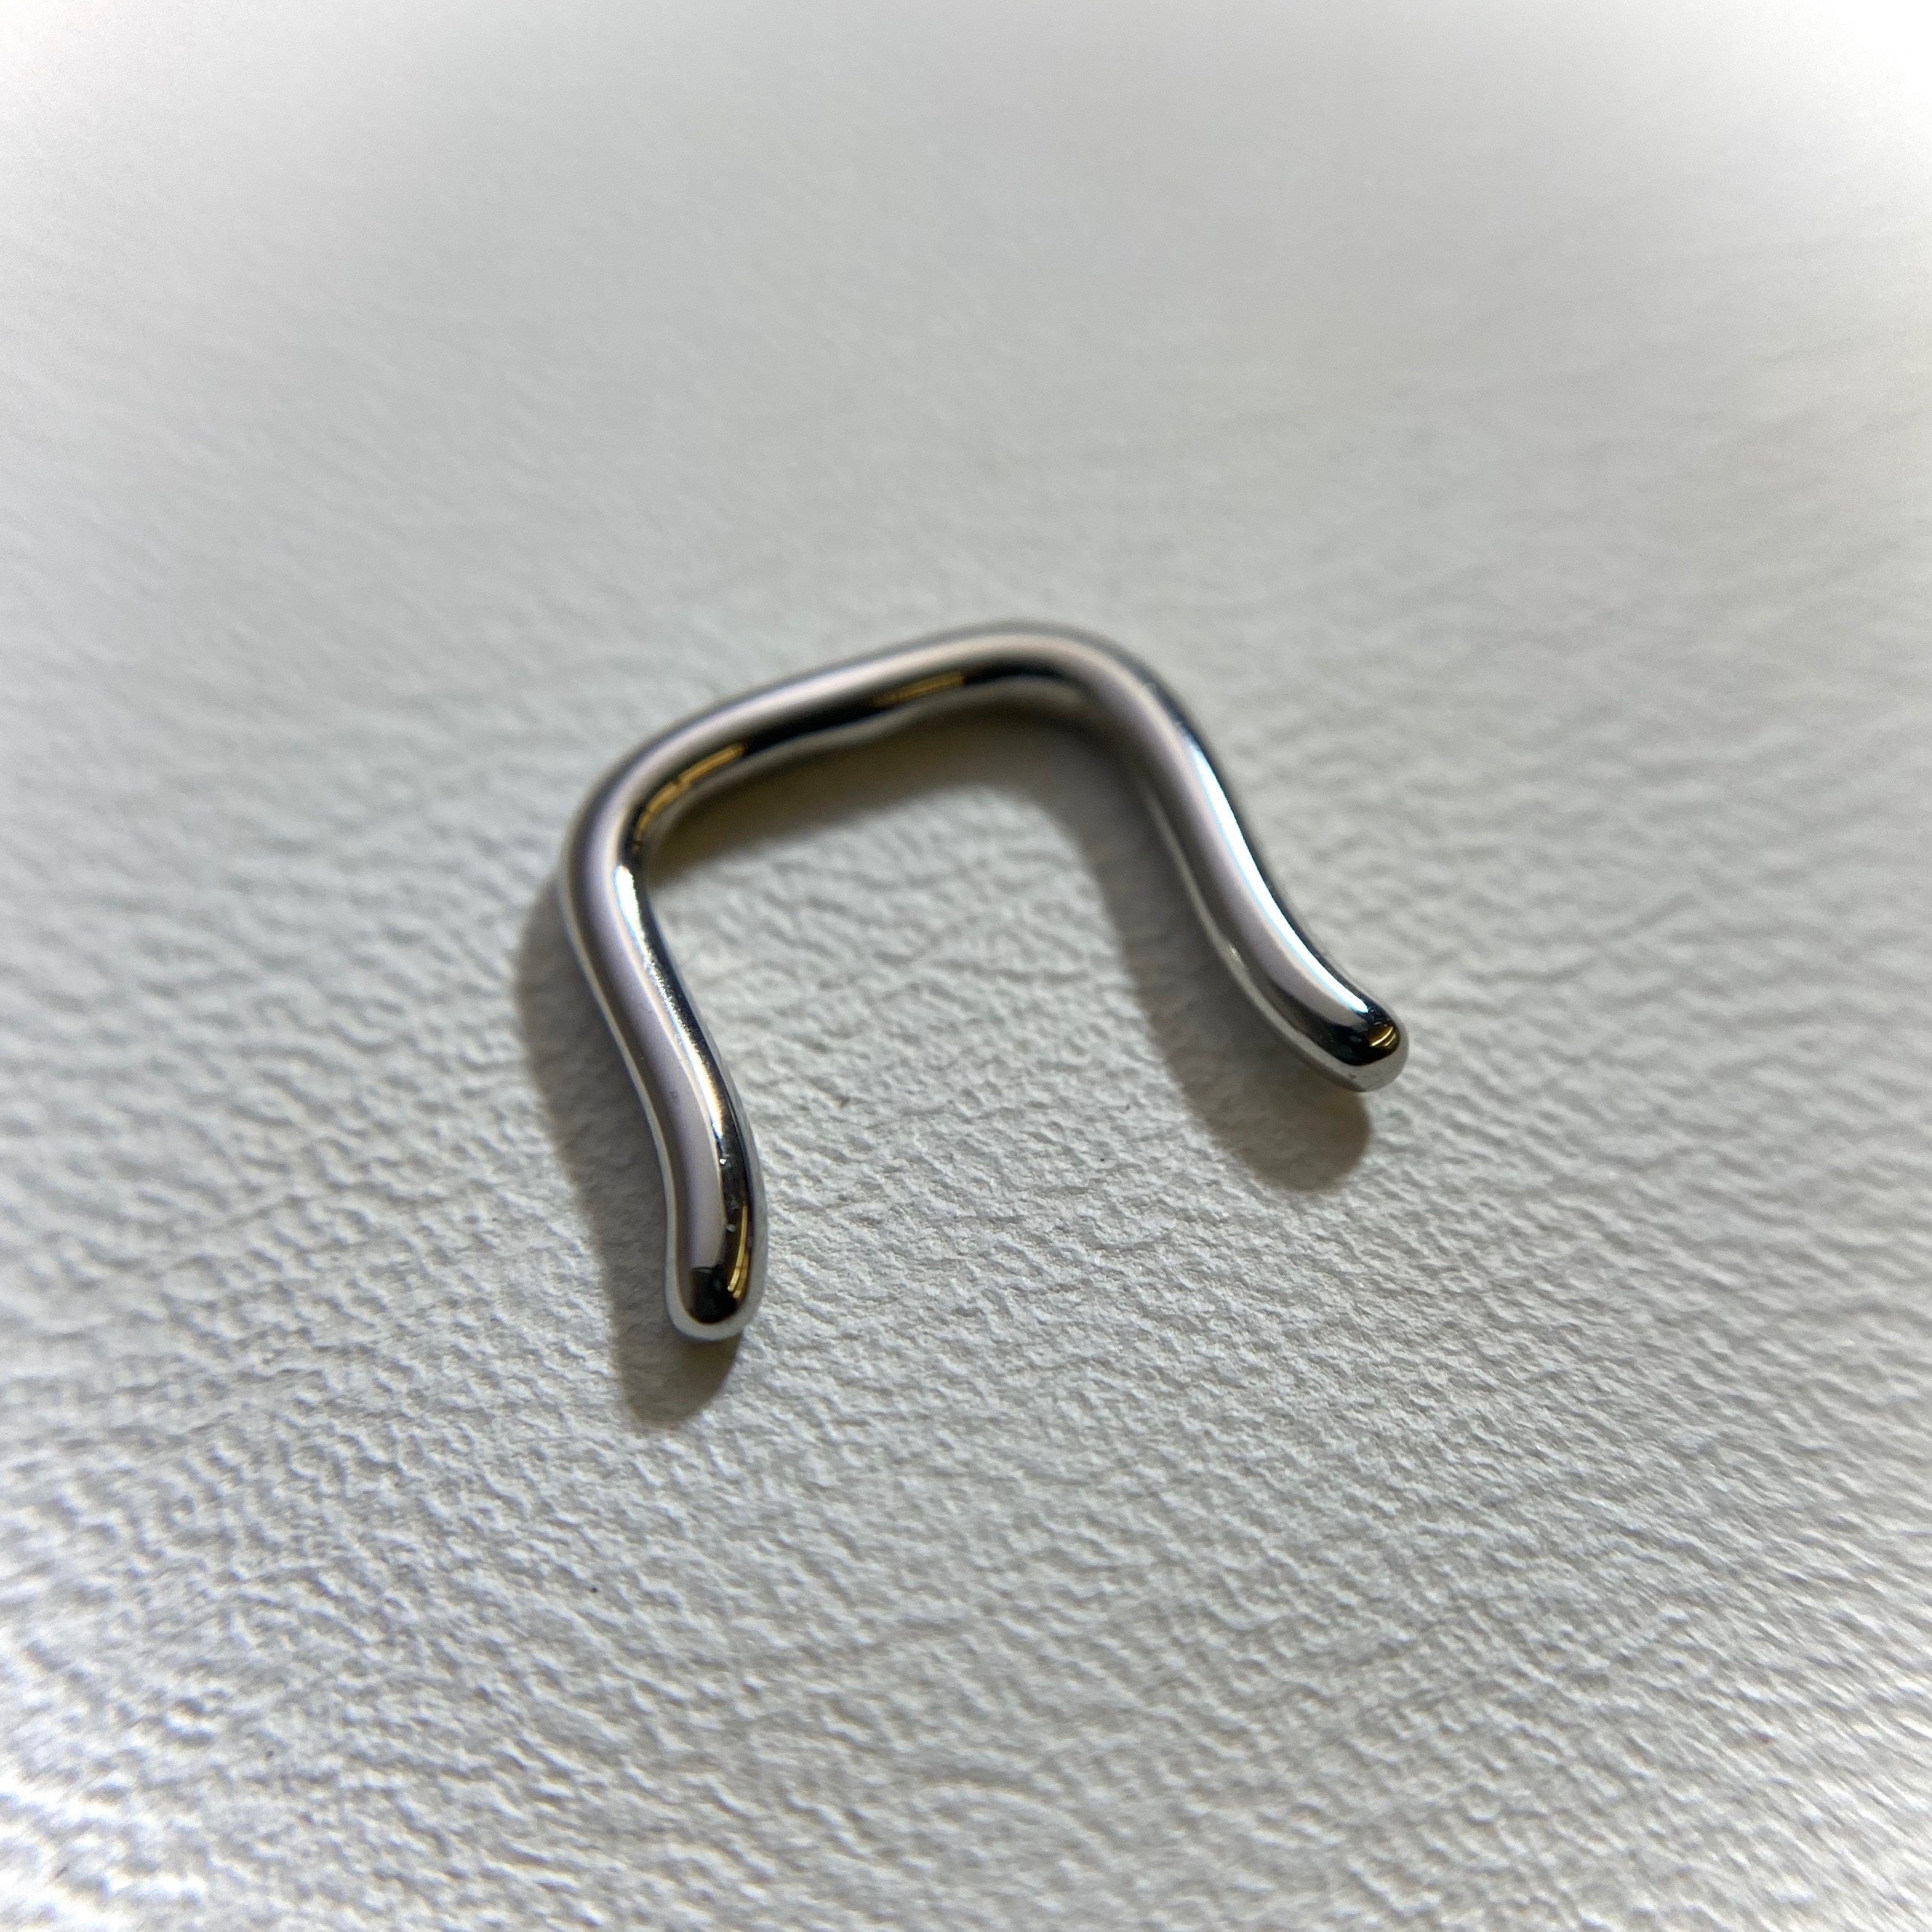 Stainless Steel Mask Retainer - Nyet Jewelry